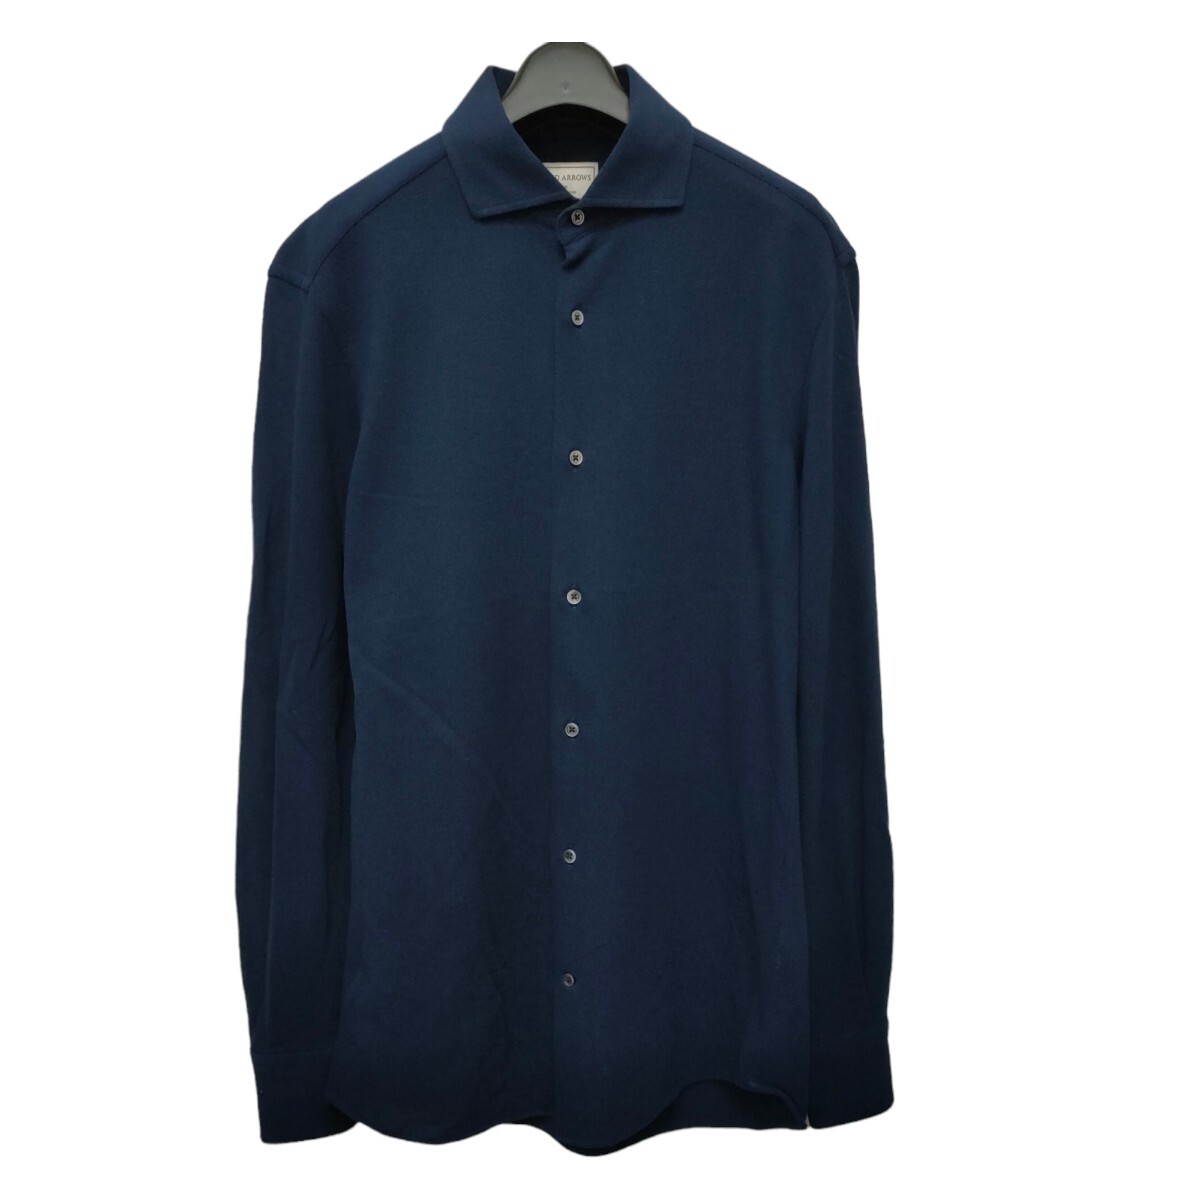 UNITED ARROWS TOKYO / United Arrows men's long sleeve button shirt cotton shirt blue S size made in Japan I-3783